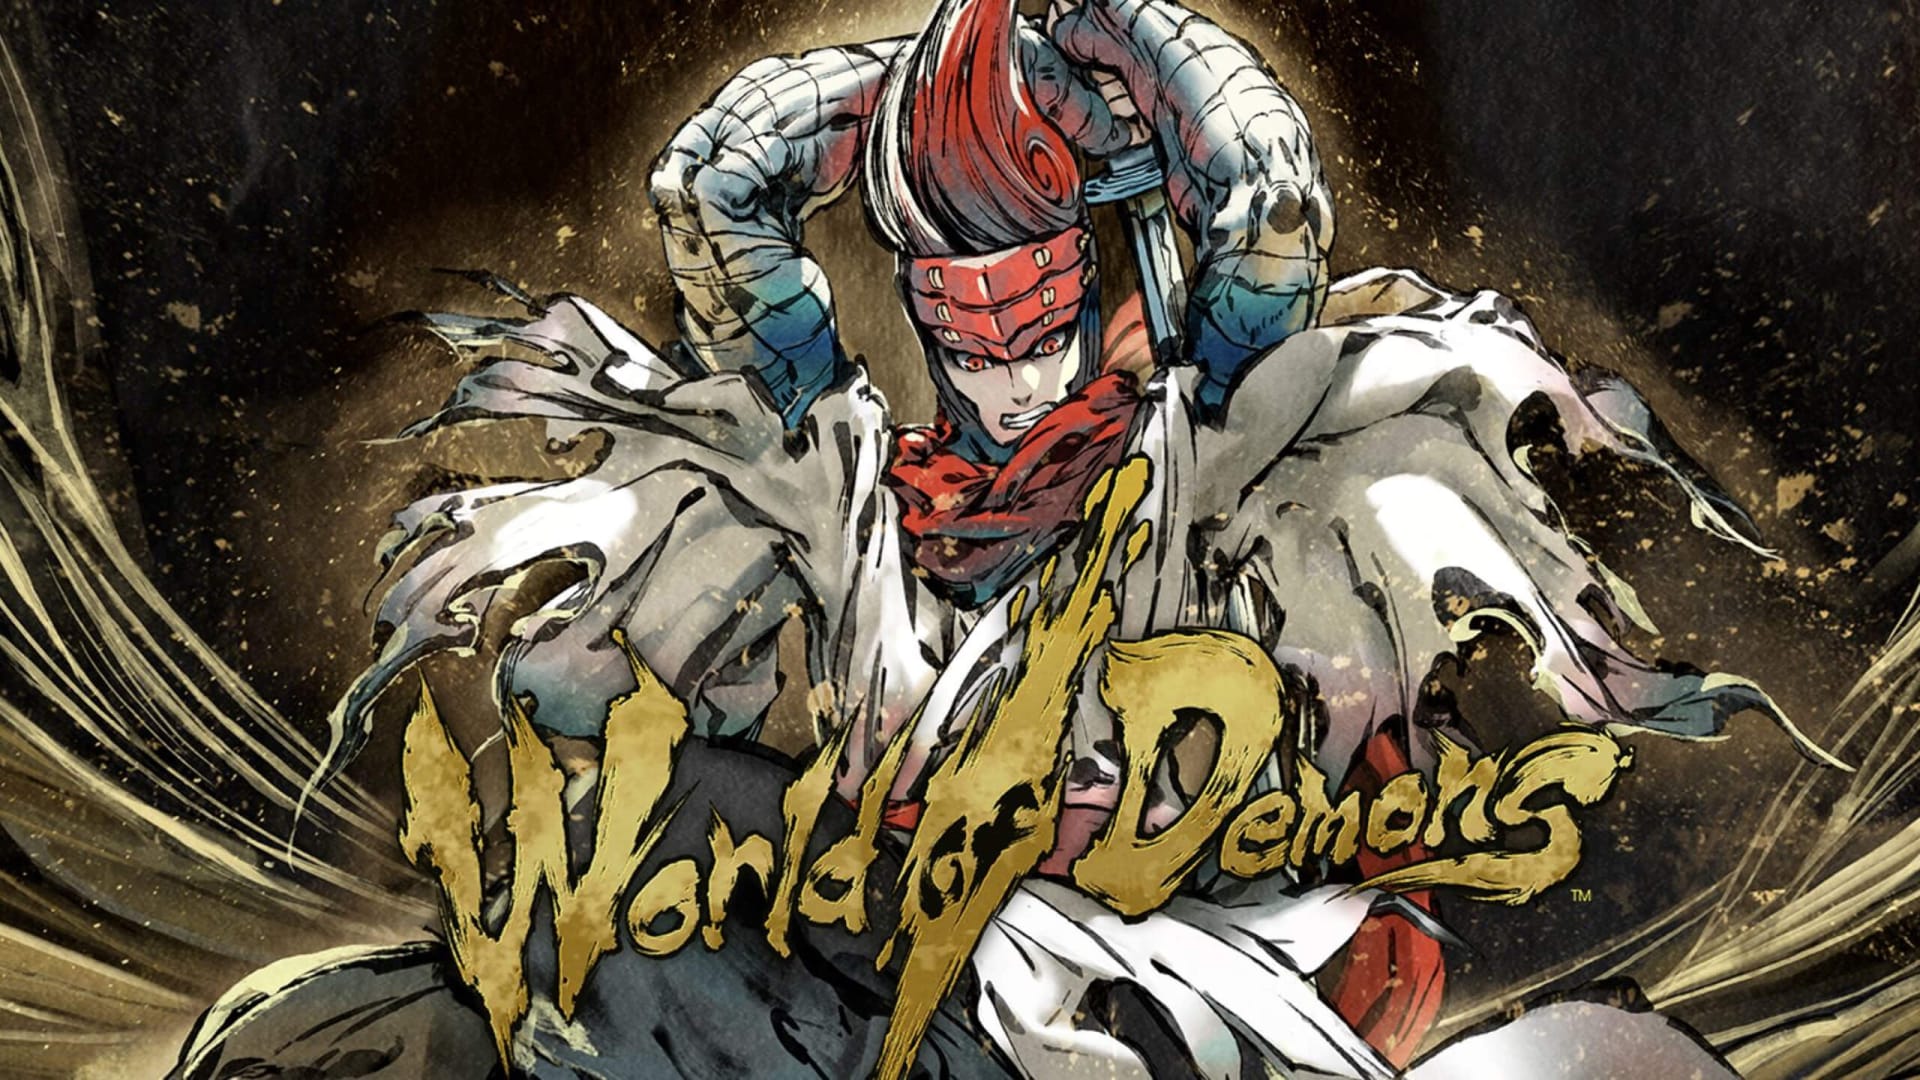 World of Demons To Be Delisted Later This Month, PlatinumGames Reveals